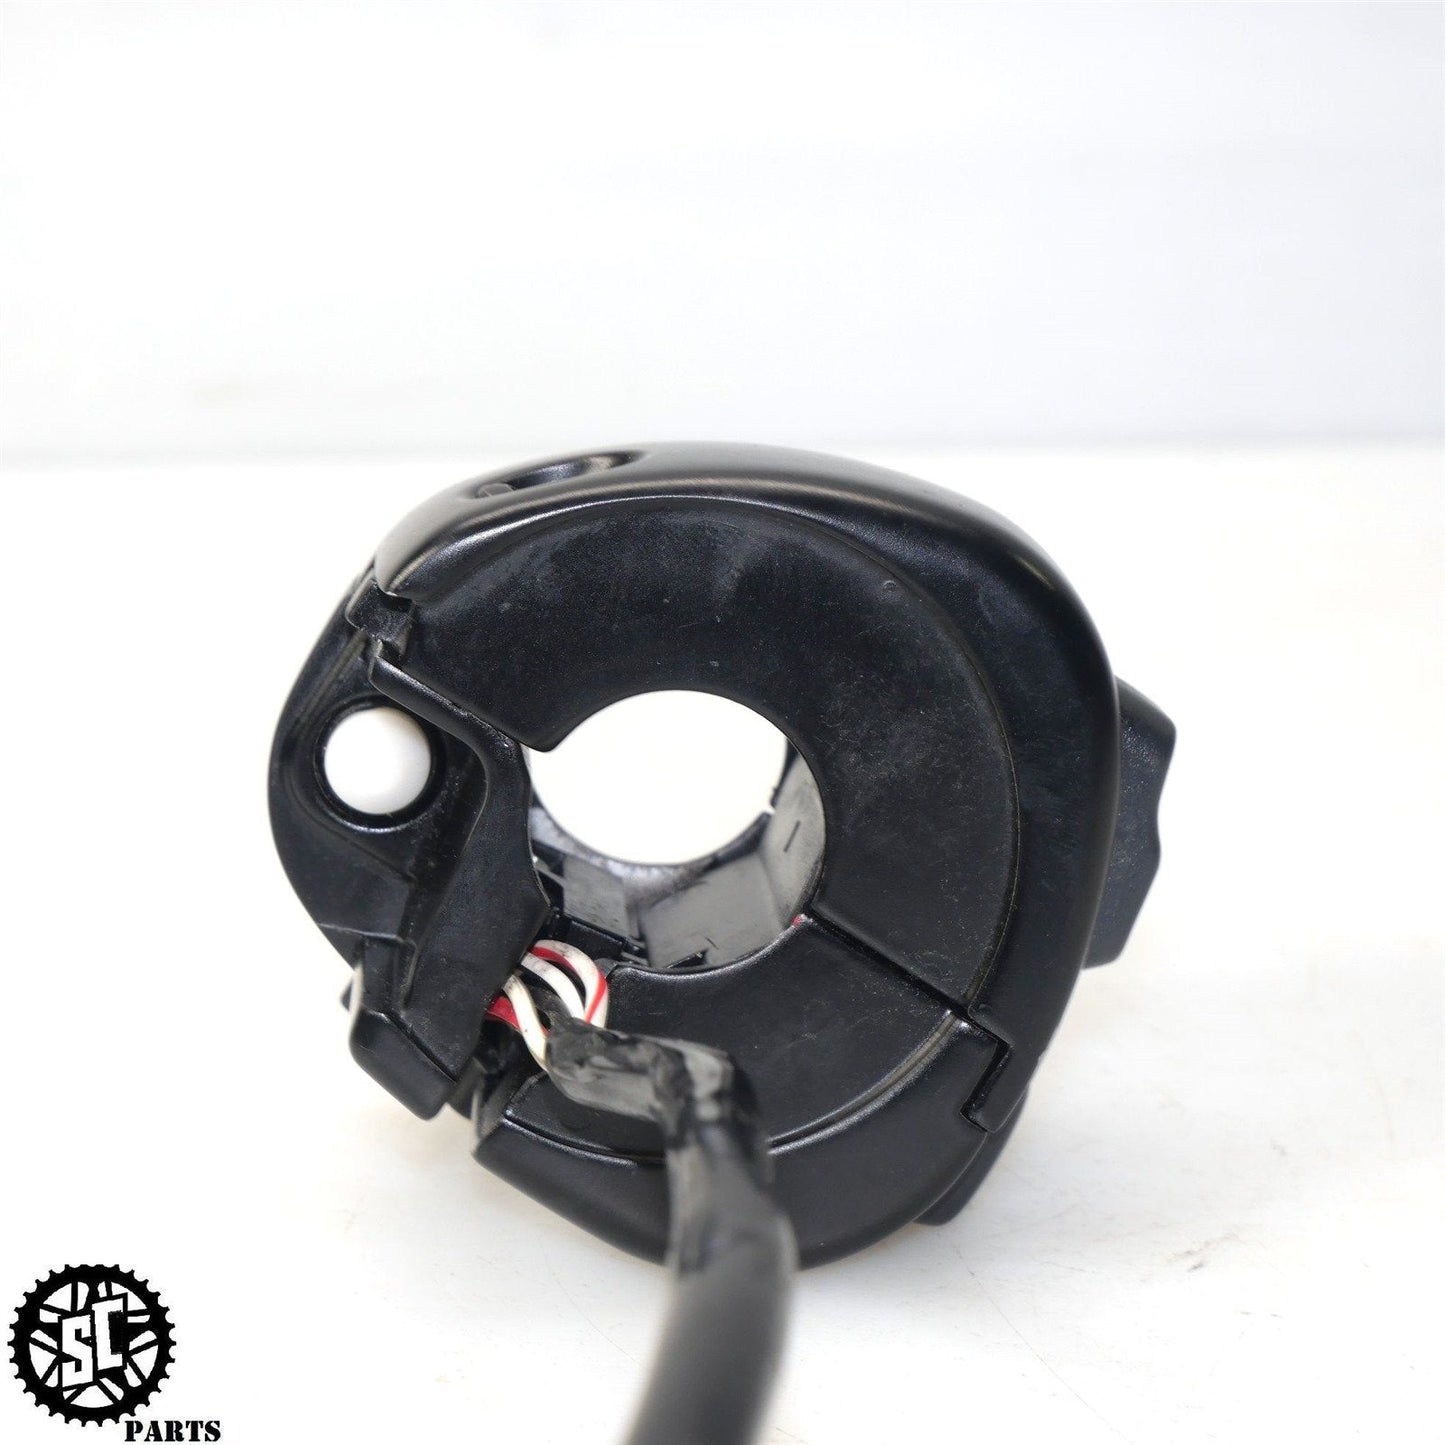 2014-2020 HARLEY SPORSTER IRON 883 RIGHT CONTROL SWITCH HD69